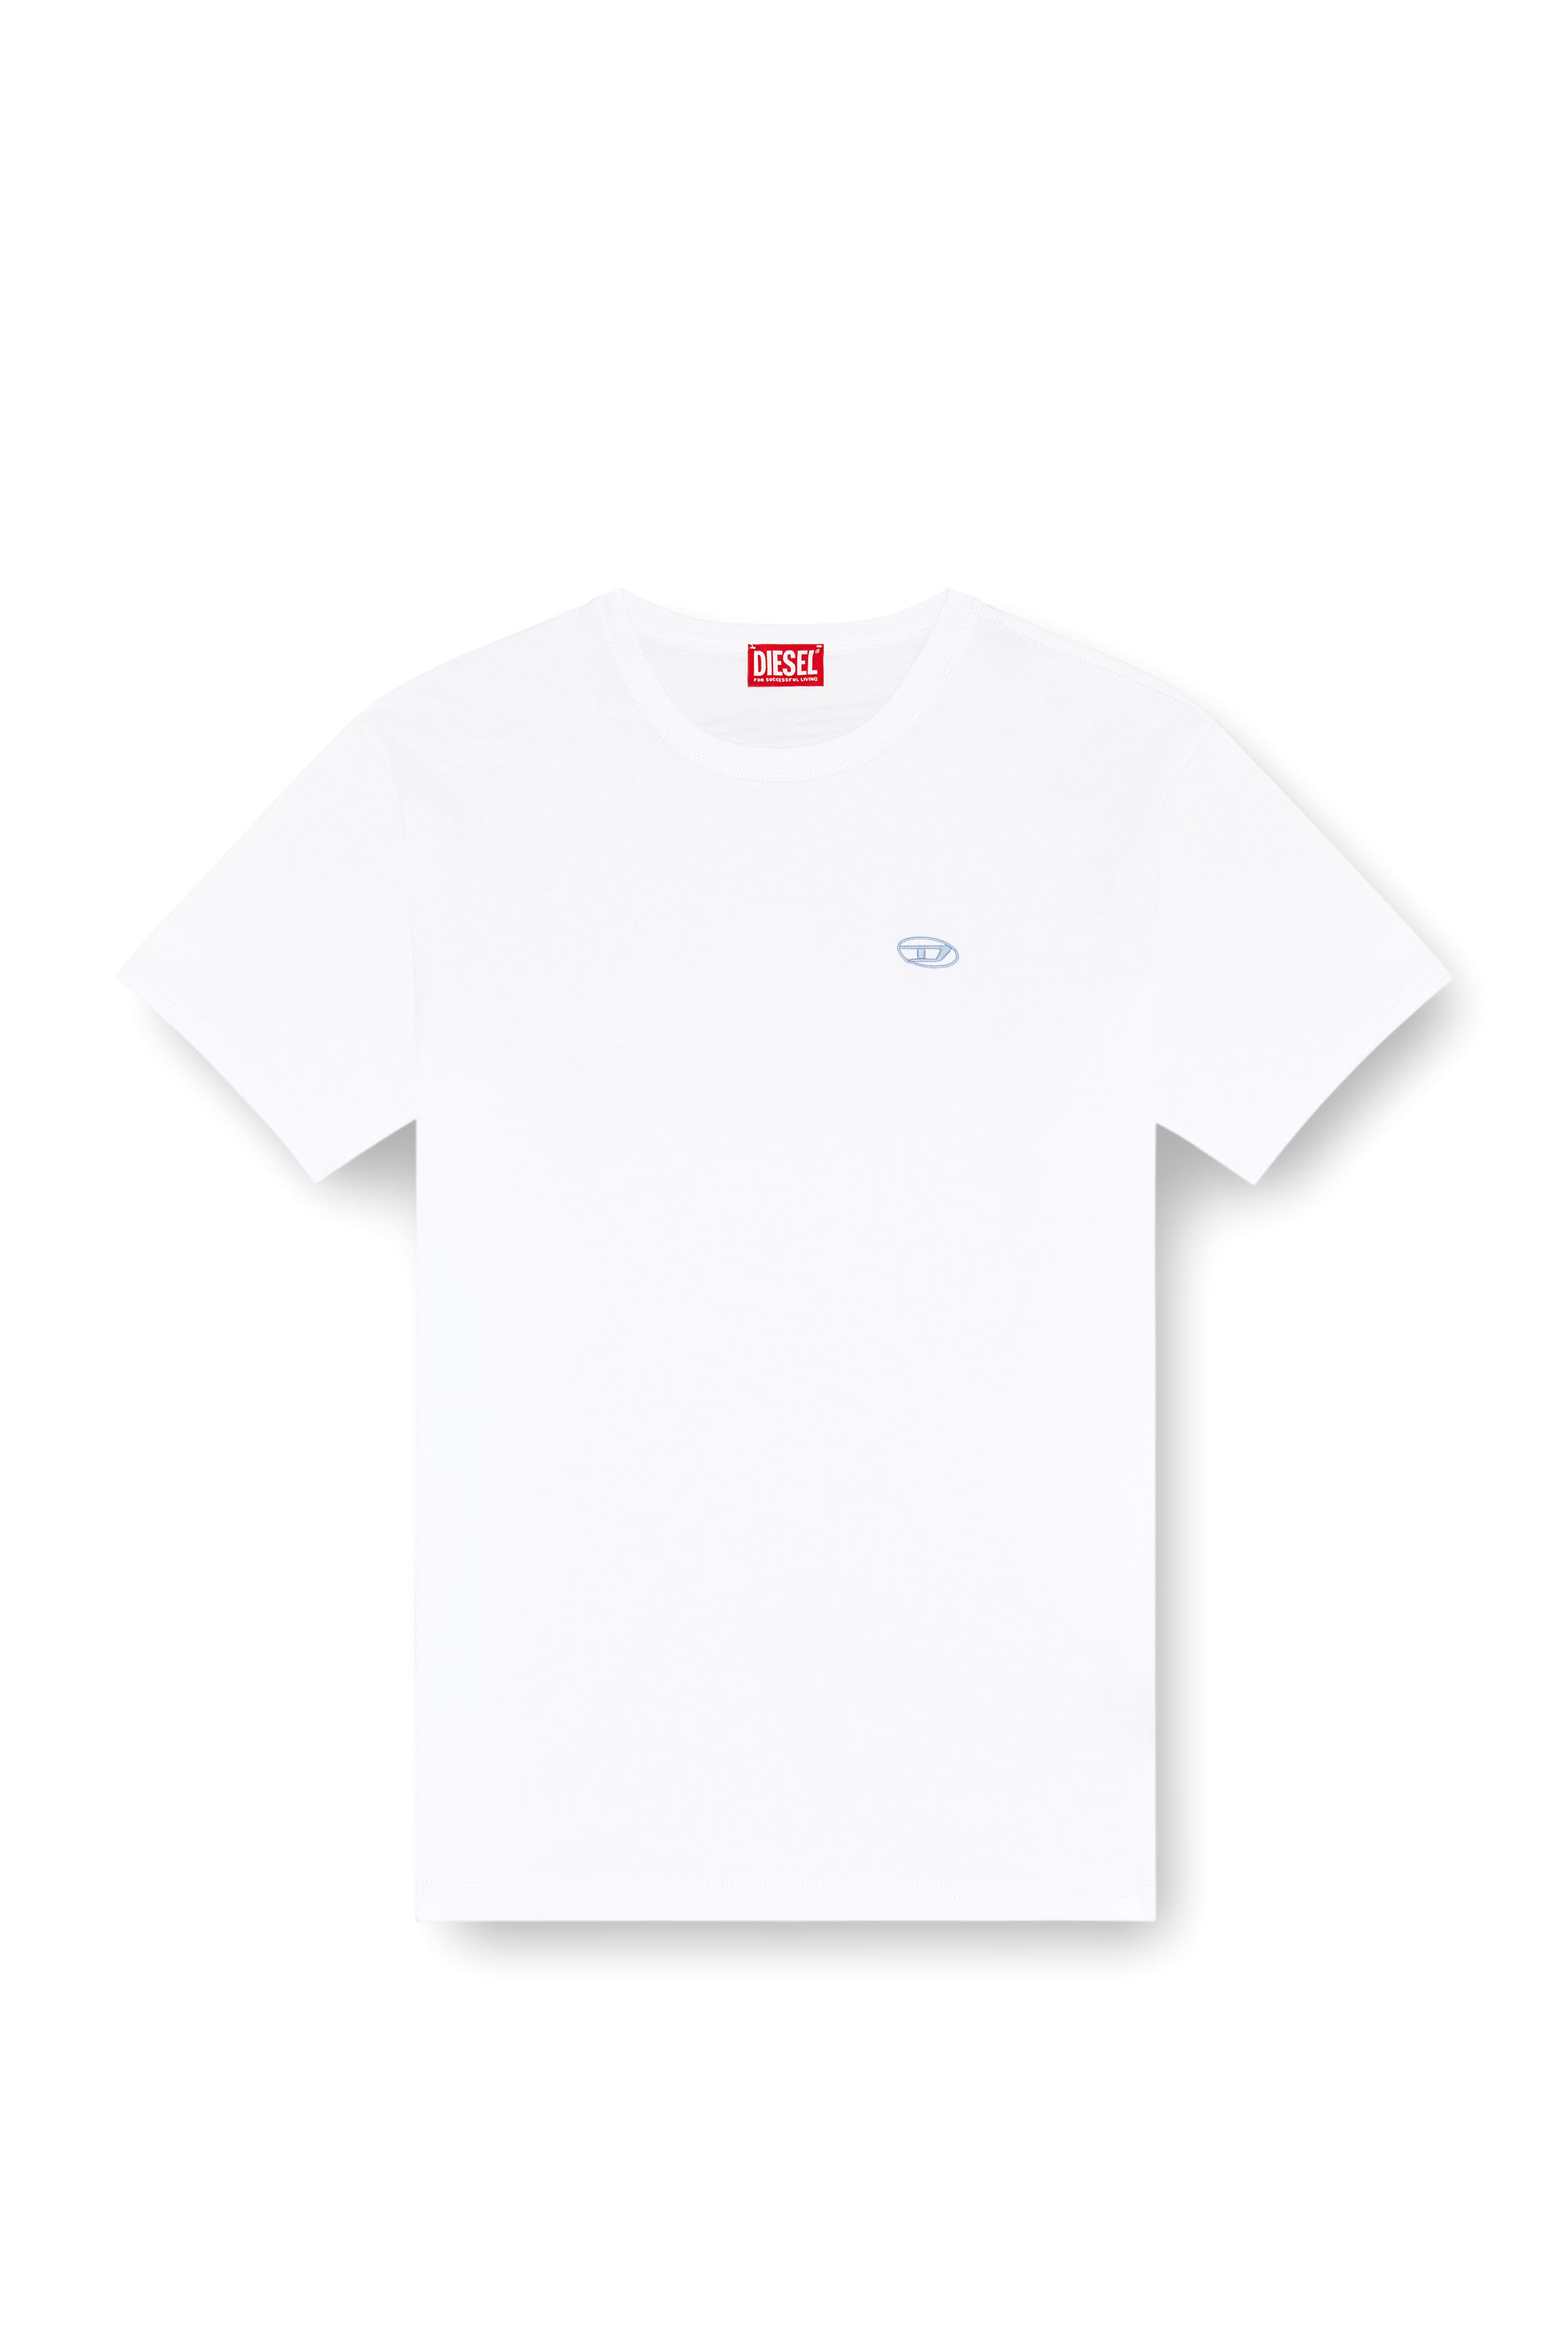 Diesel - T-BOXT-K18, Male T-shirt with Oval D print and embroidery in ホワイト - Image 3